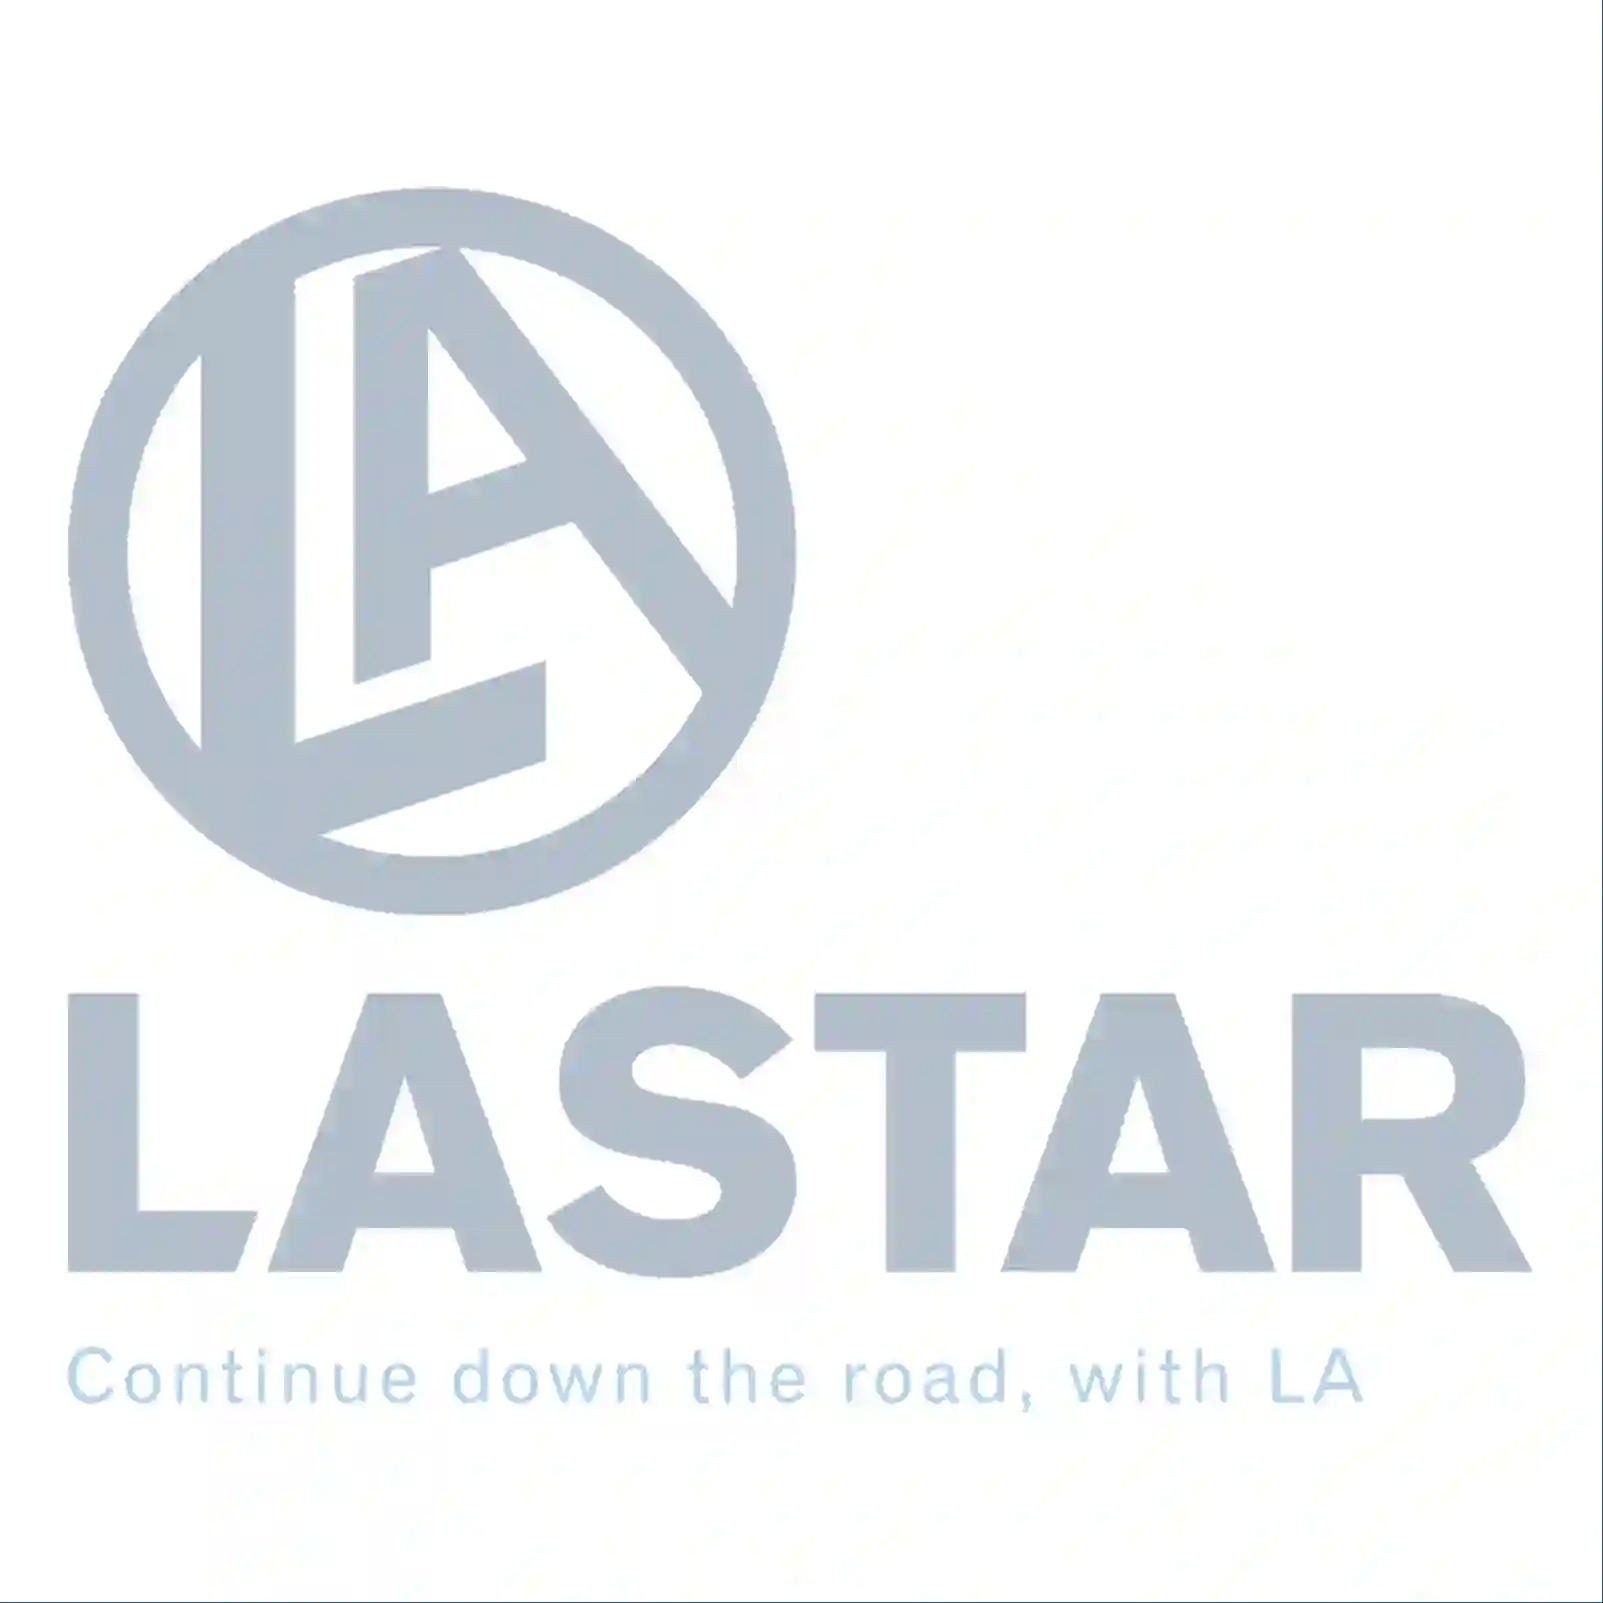  Belt tensioner, air conditioning, reinforced || Lastar Spare Part | Truck Spare Parts, Auotomotive Spare Parts